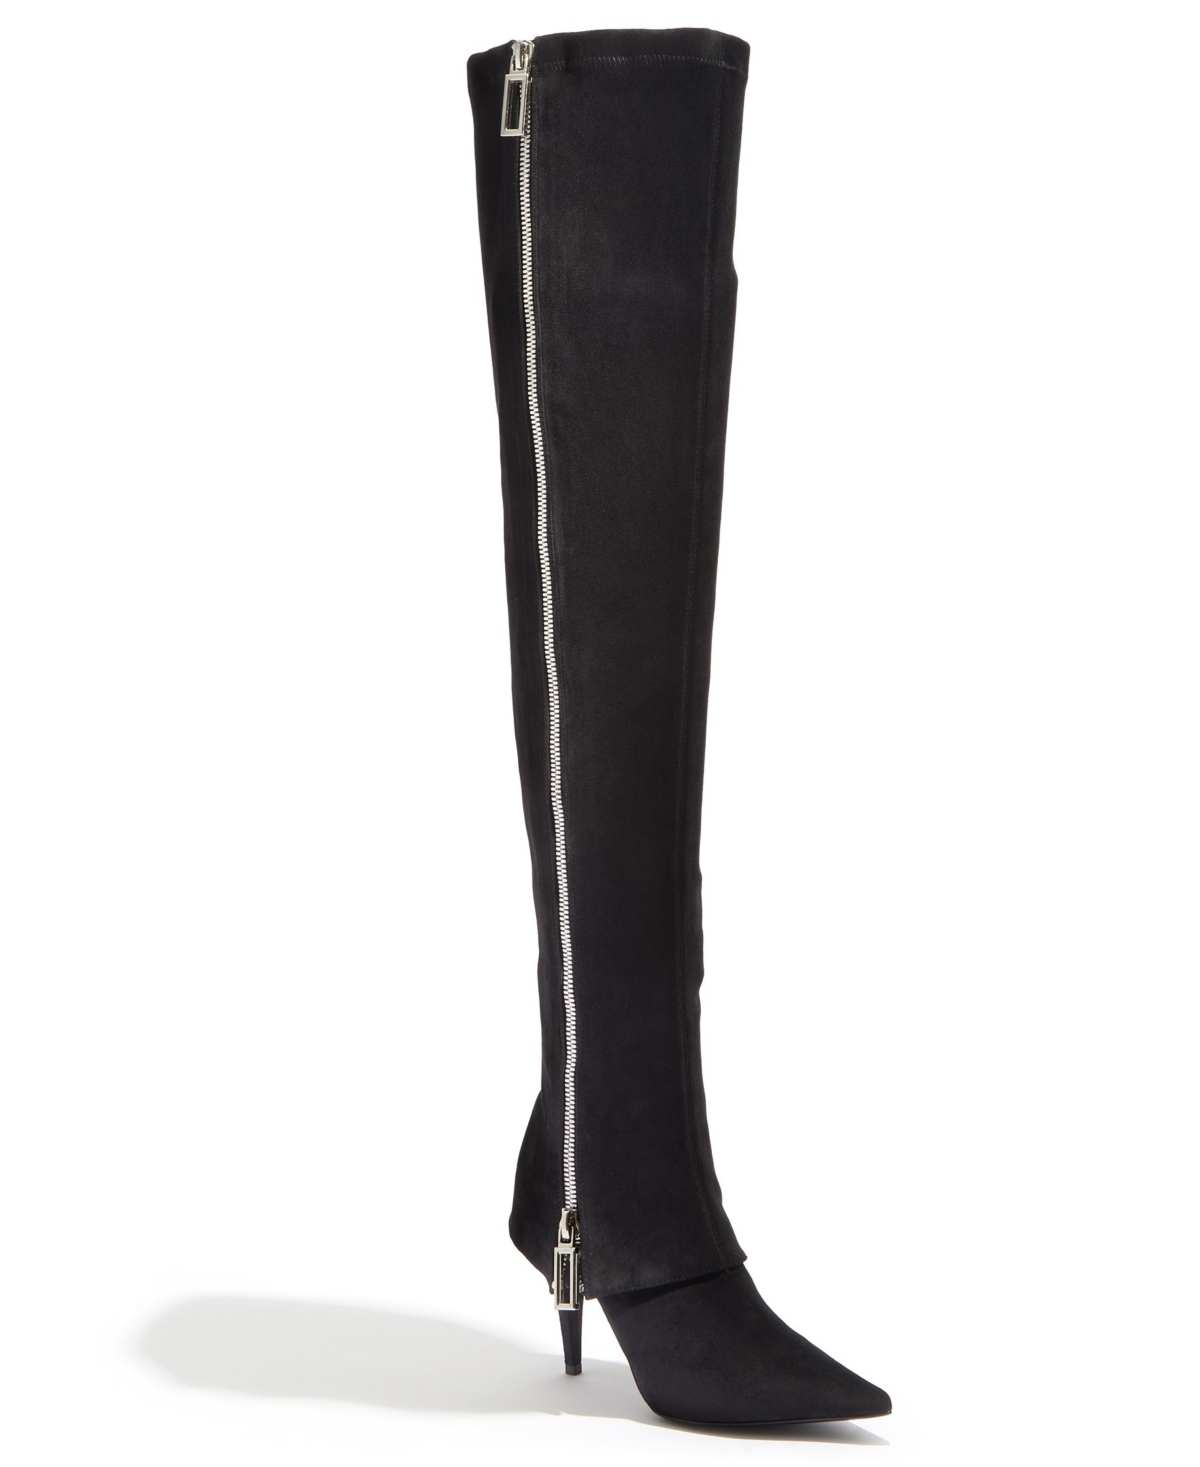 Womens Suede Thigh High Boots ( Manhattan) - Black suede with silver zipper